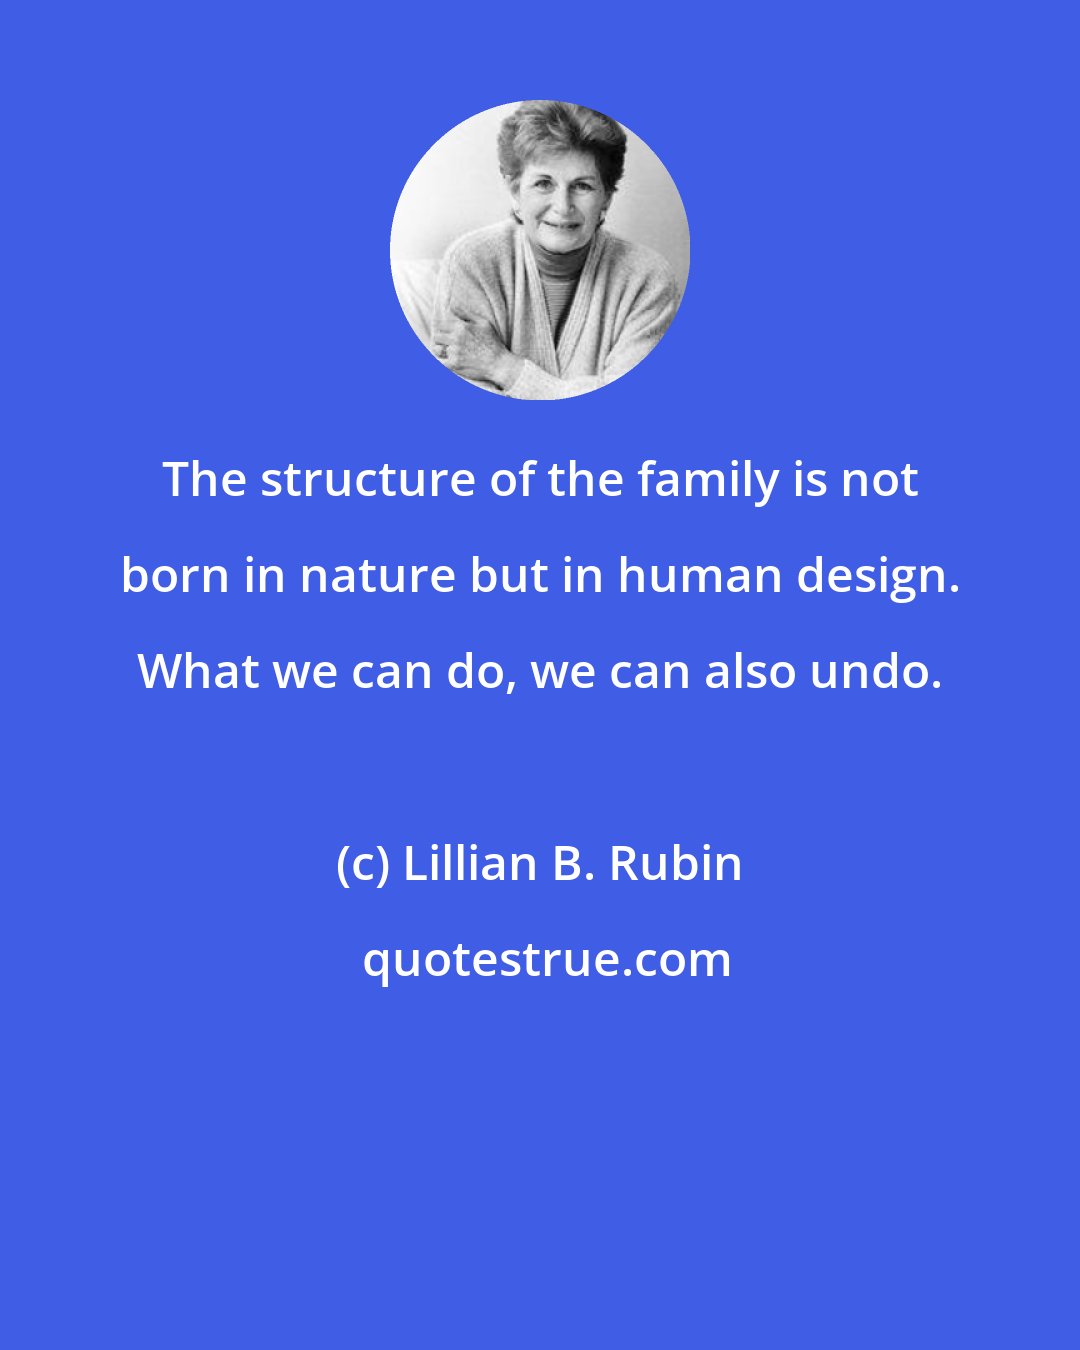 Lillian B. Rubin: The structure of the family is not born in nature but in human design. What we can do, we can also undo.